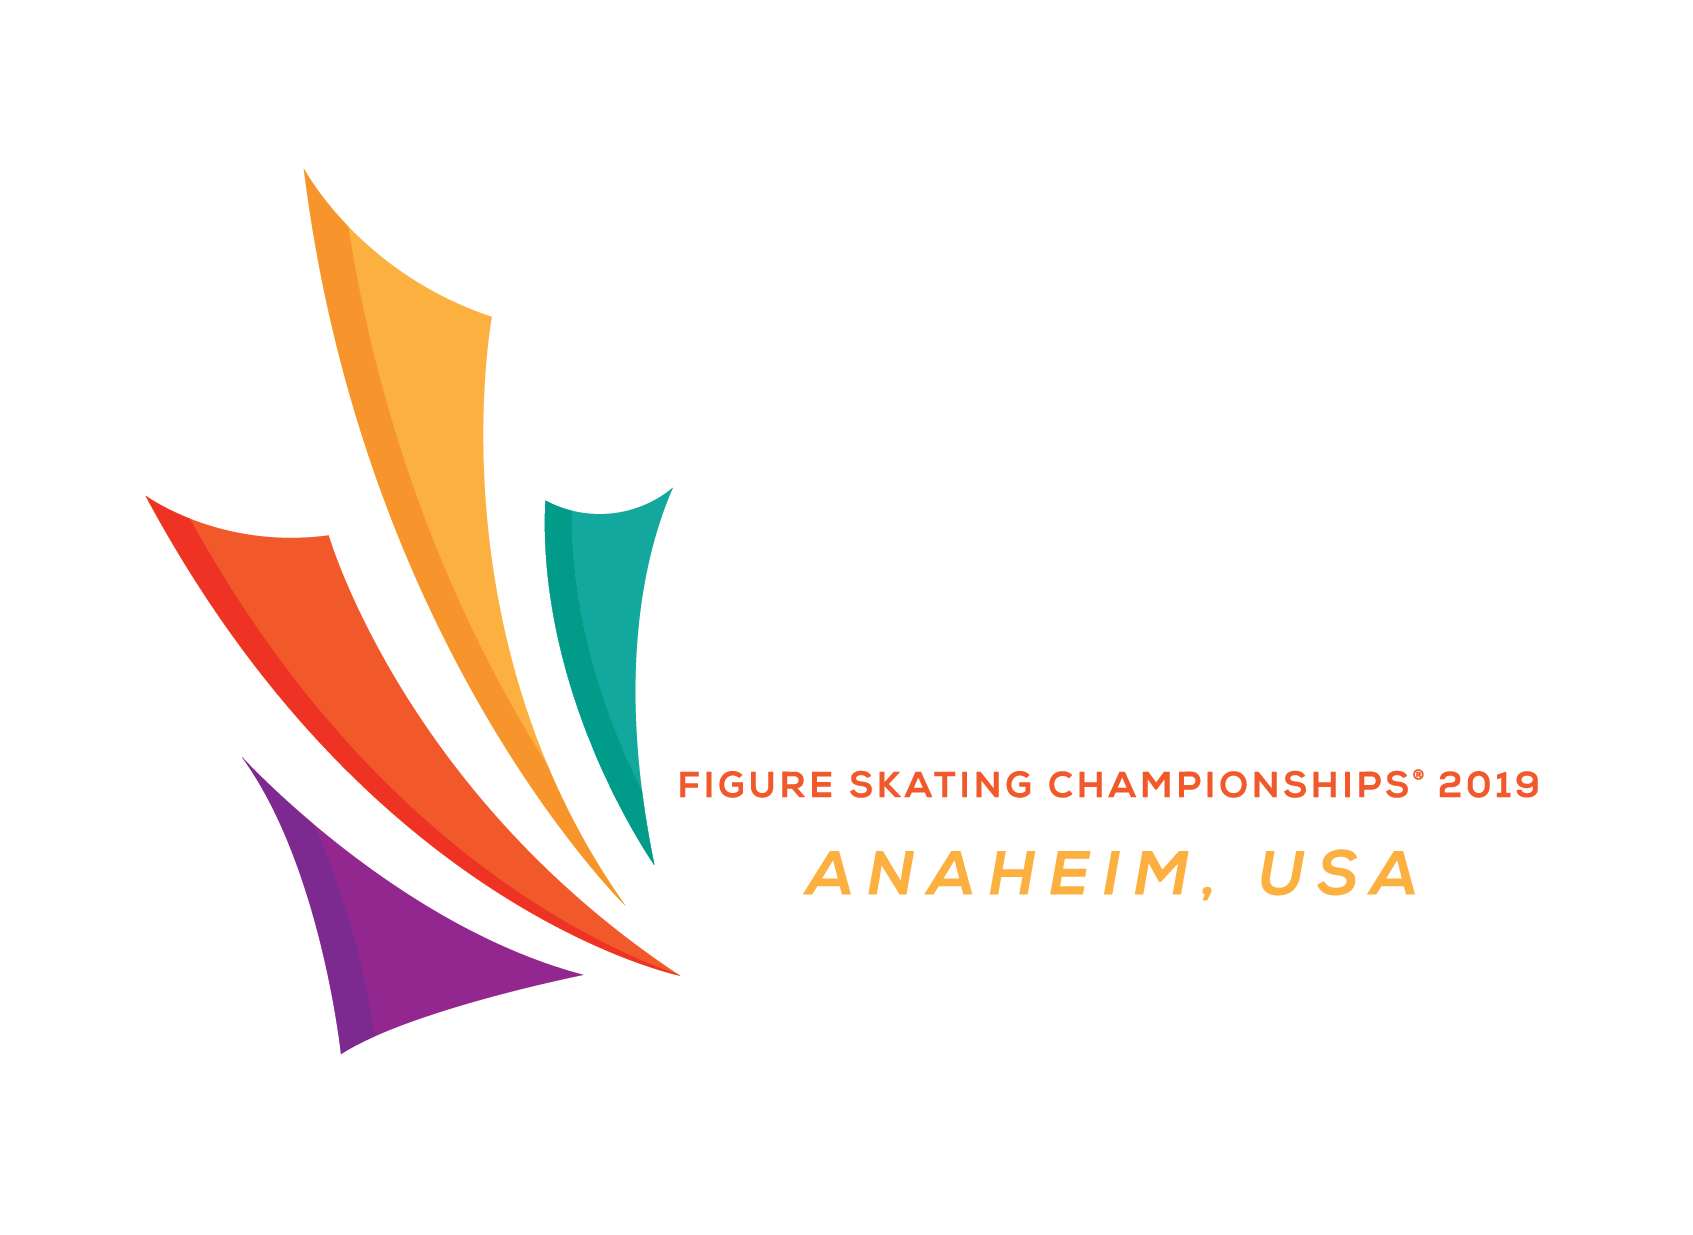 Anaheim is due to host the ISU Four Continents Figure Skating Championships in 2019 ©USA Figure Skating